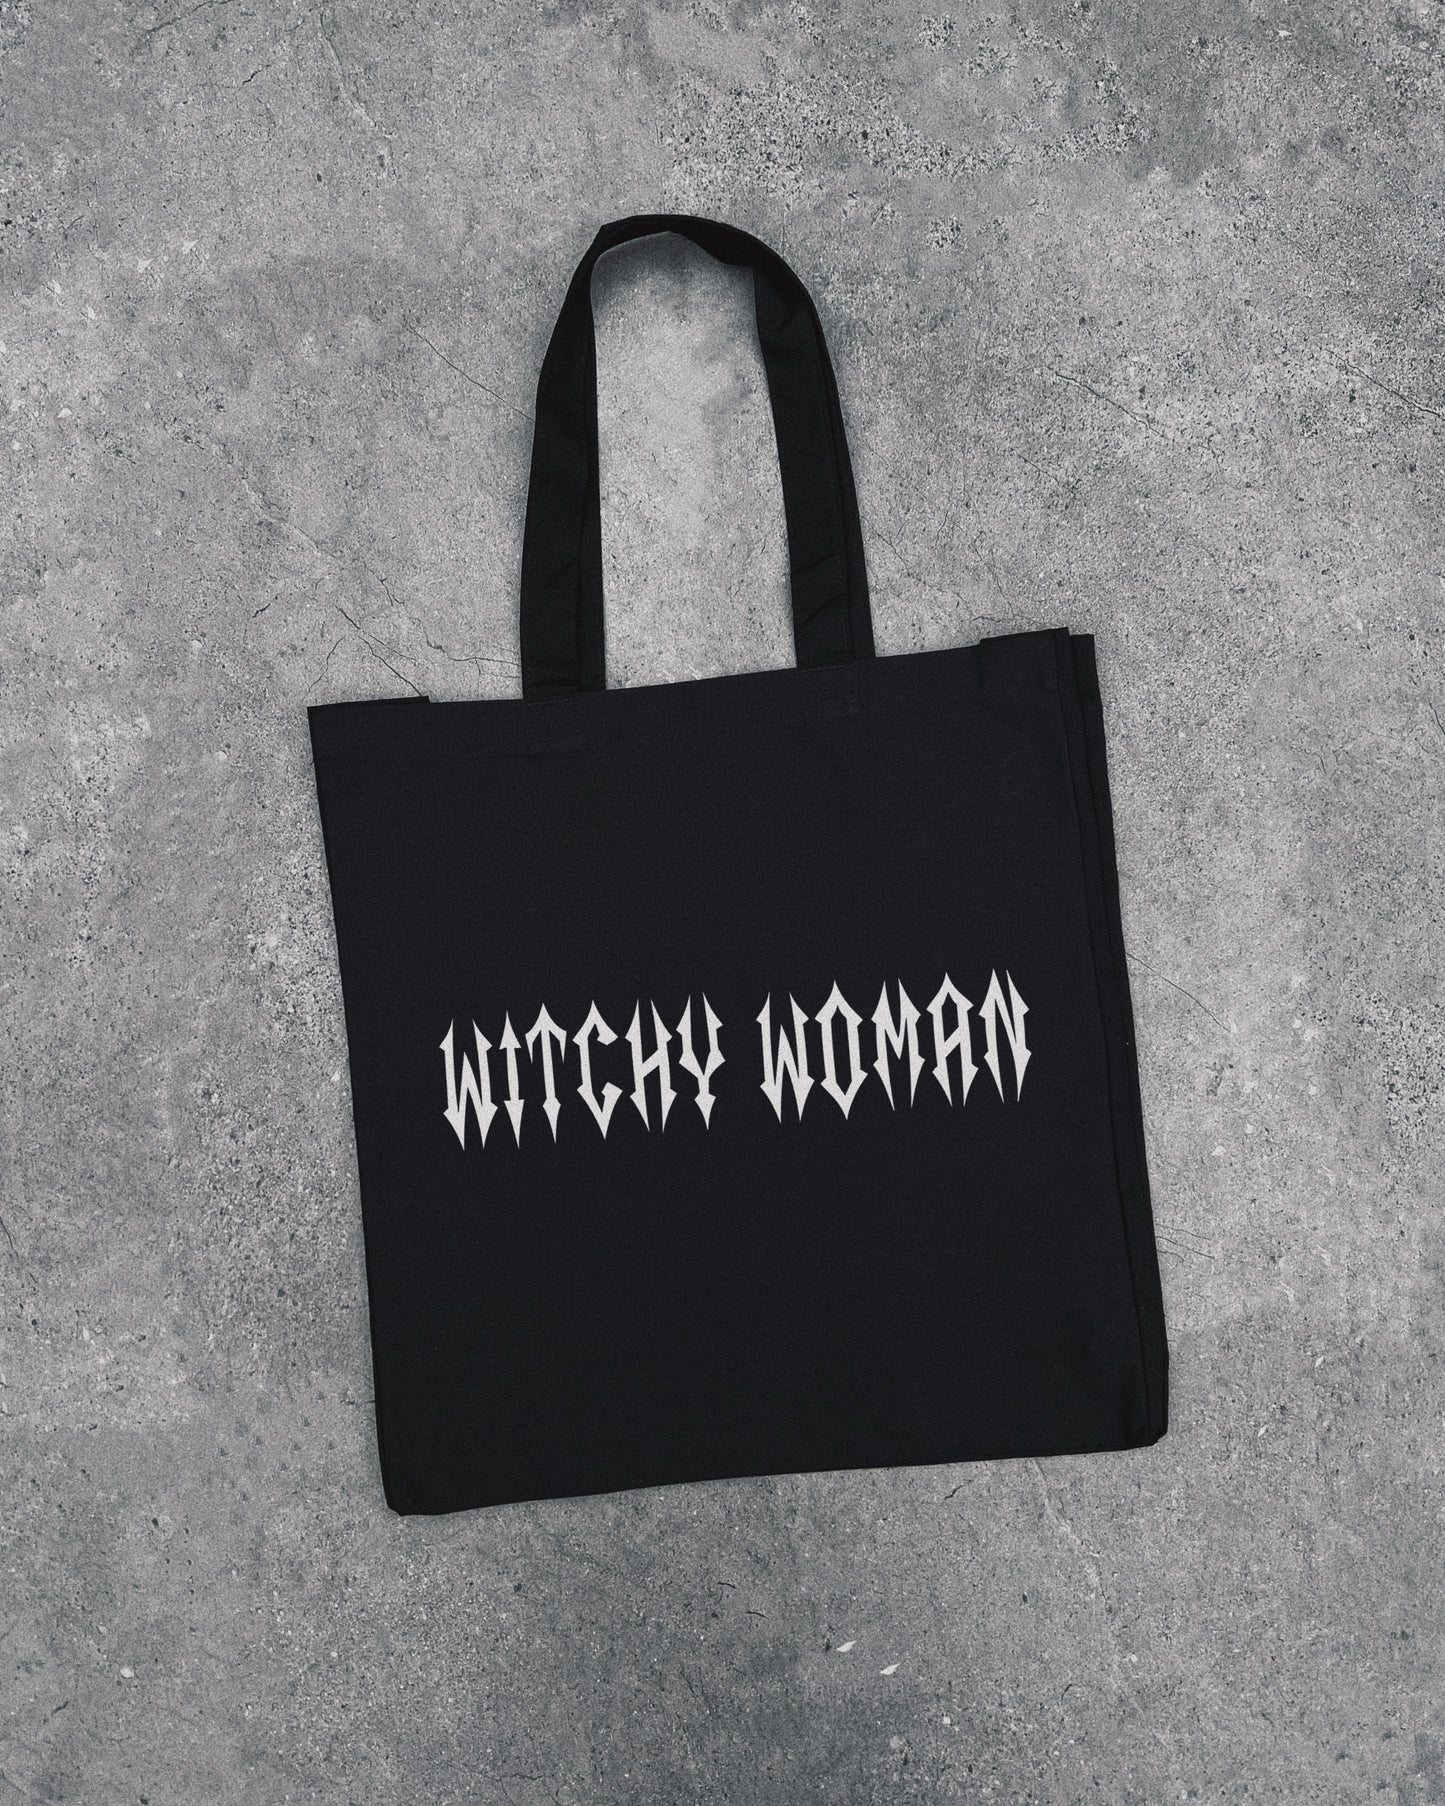 Witchy Woman - Tote Bag